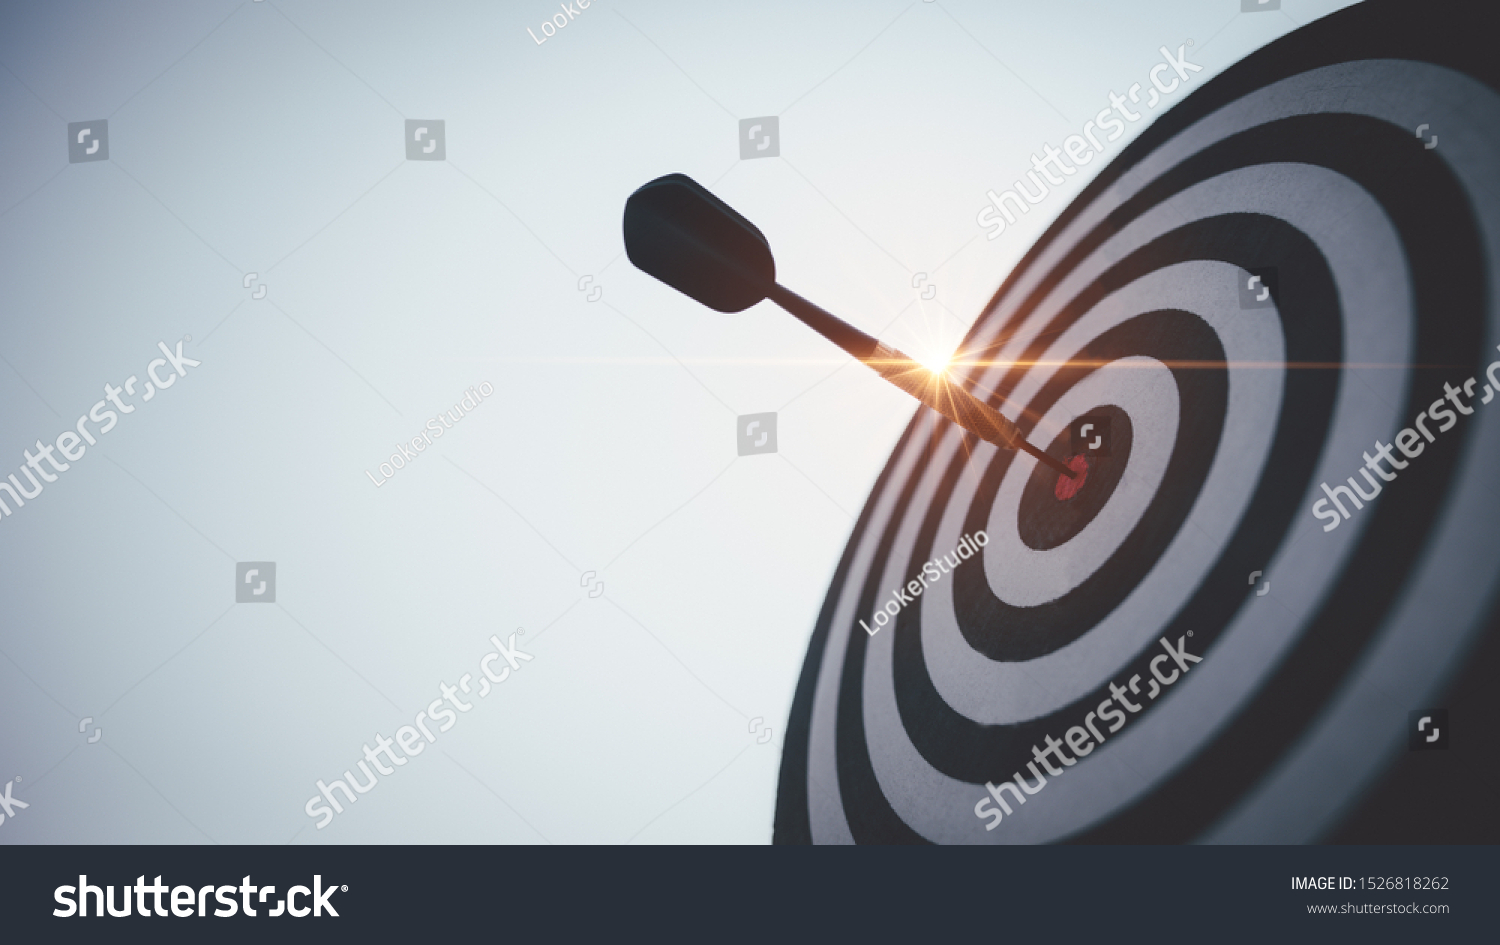 Bullseye is a target of business. Dart is an opportunity and Dartboard is the target and goal. So both of that represent a challenge in business marketing as concept. #1526818262